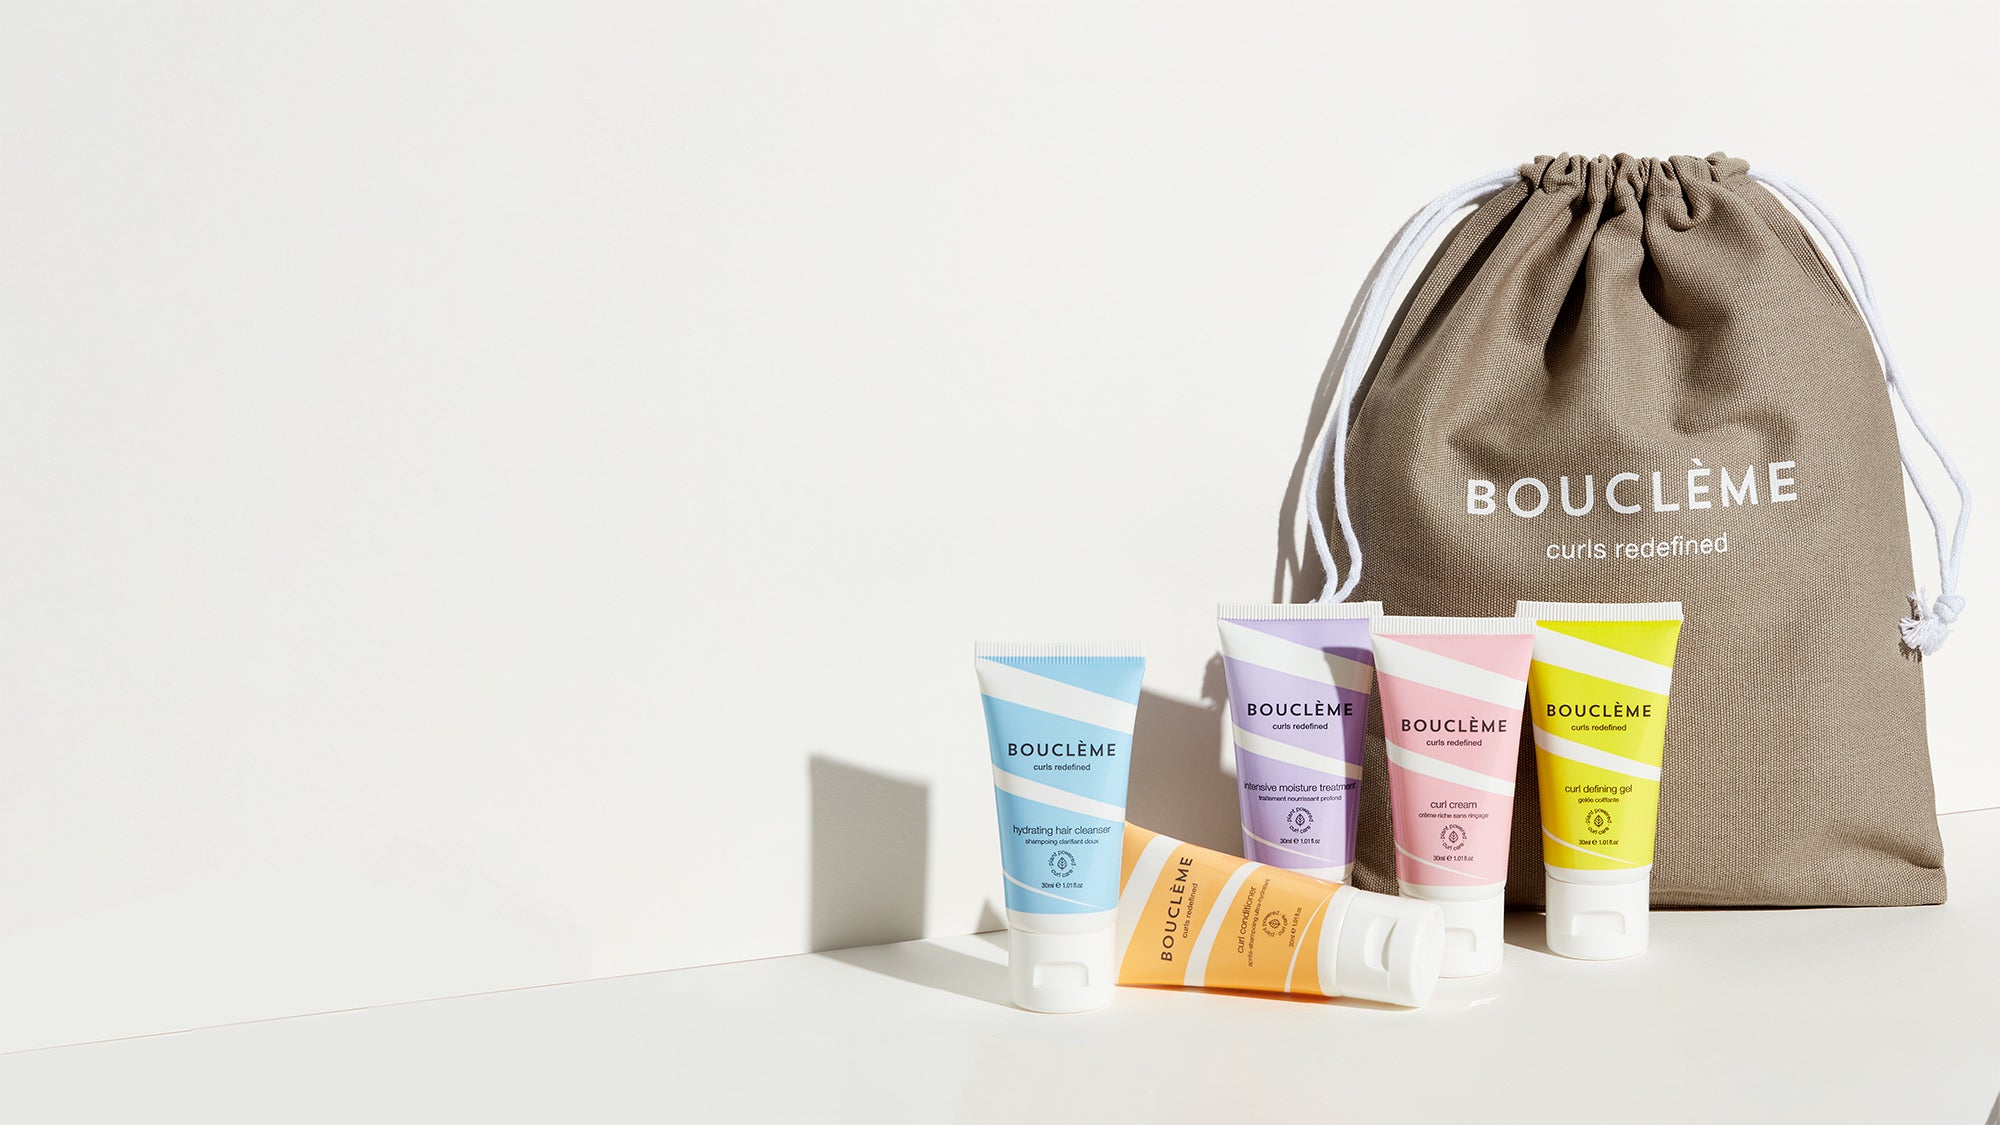 Bouclème's Mini Curl Essentials range for curly hair on-the-go